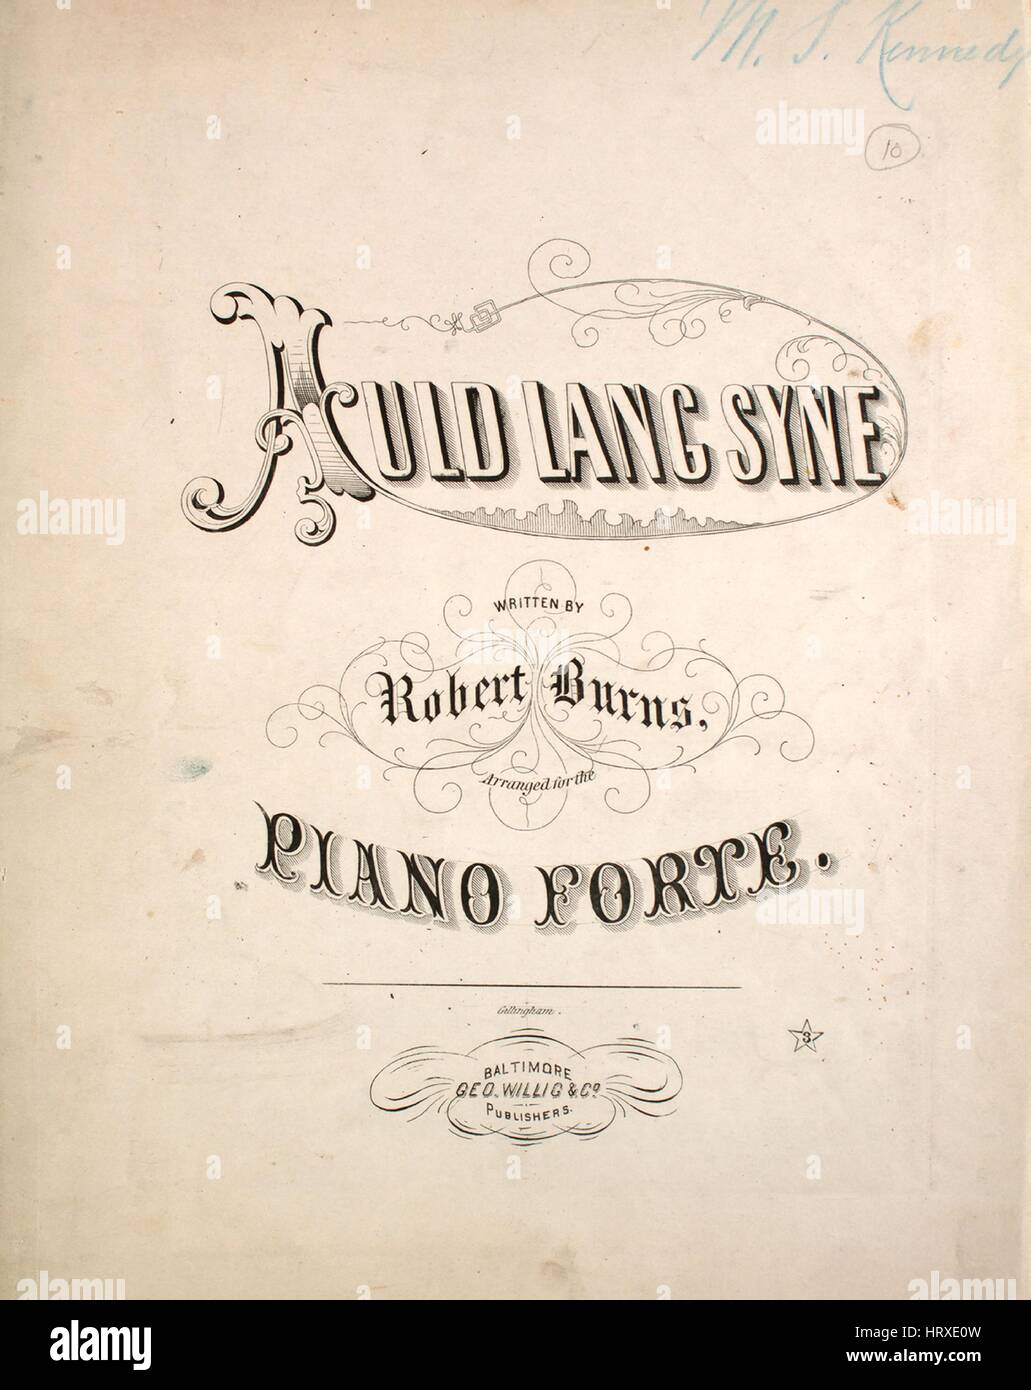 Sheet music cover image of the song 'Auld Lang Syne', with original Stock Photo Alamy